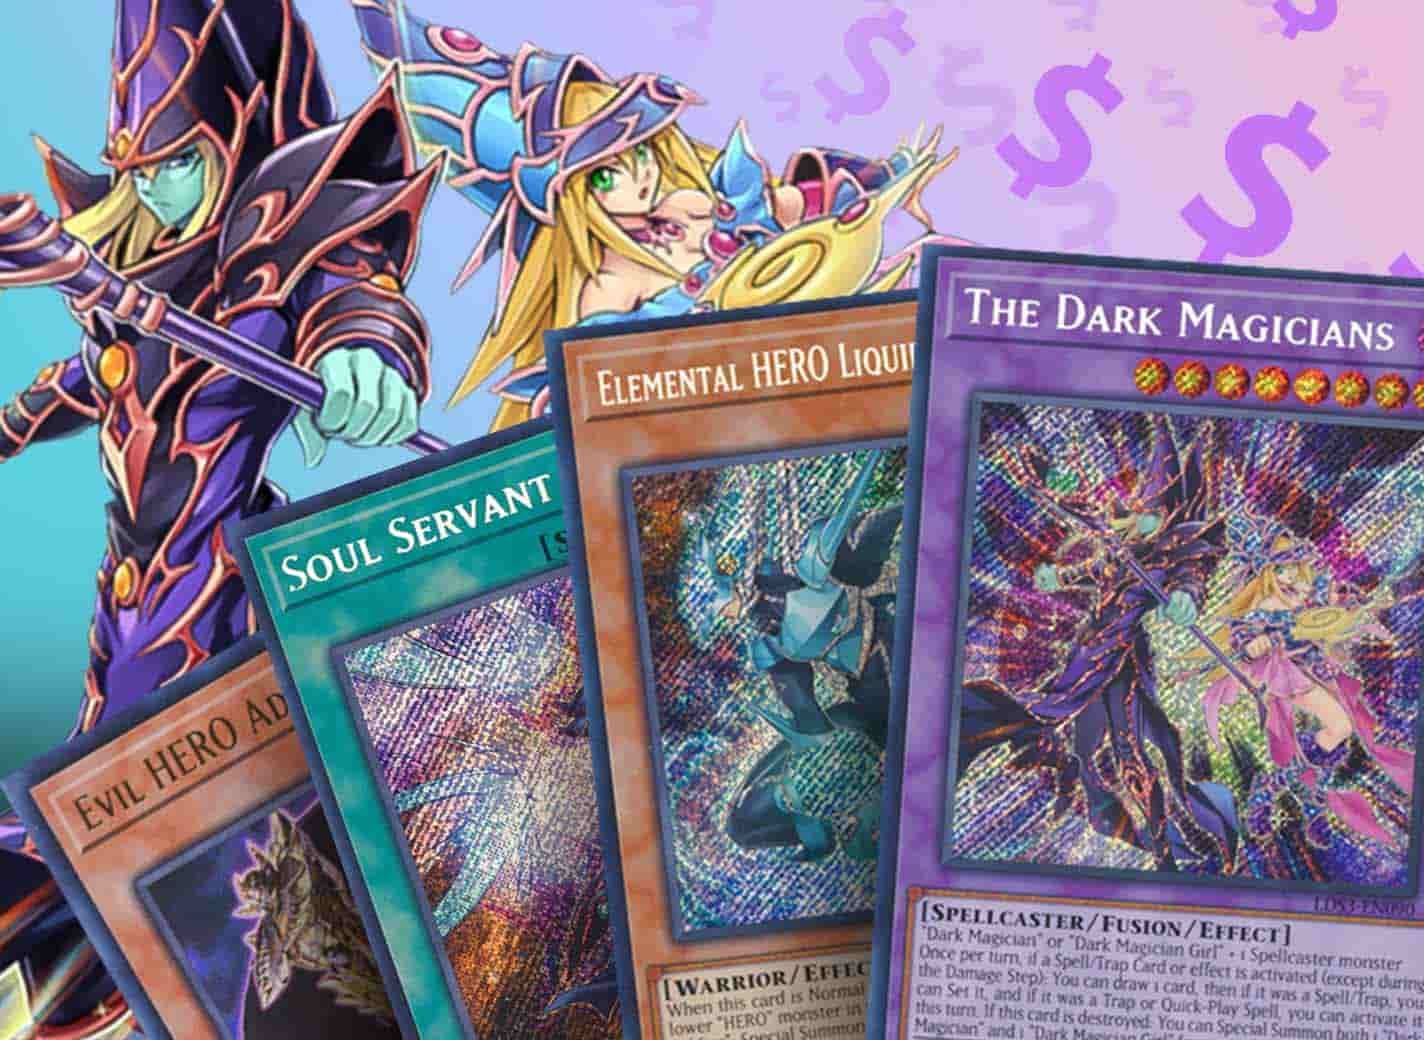 Top 100 Most Expensive Ultimate Rare Cards : YuGiOh Card Prices